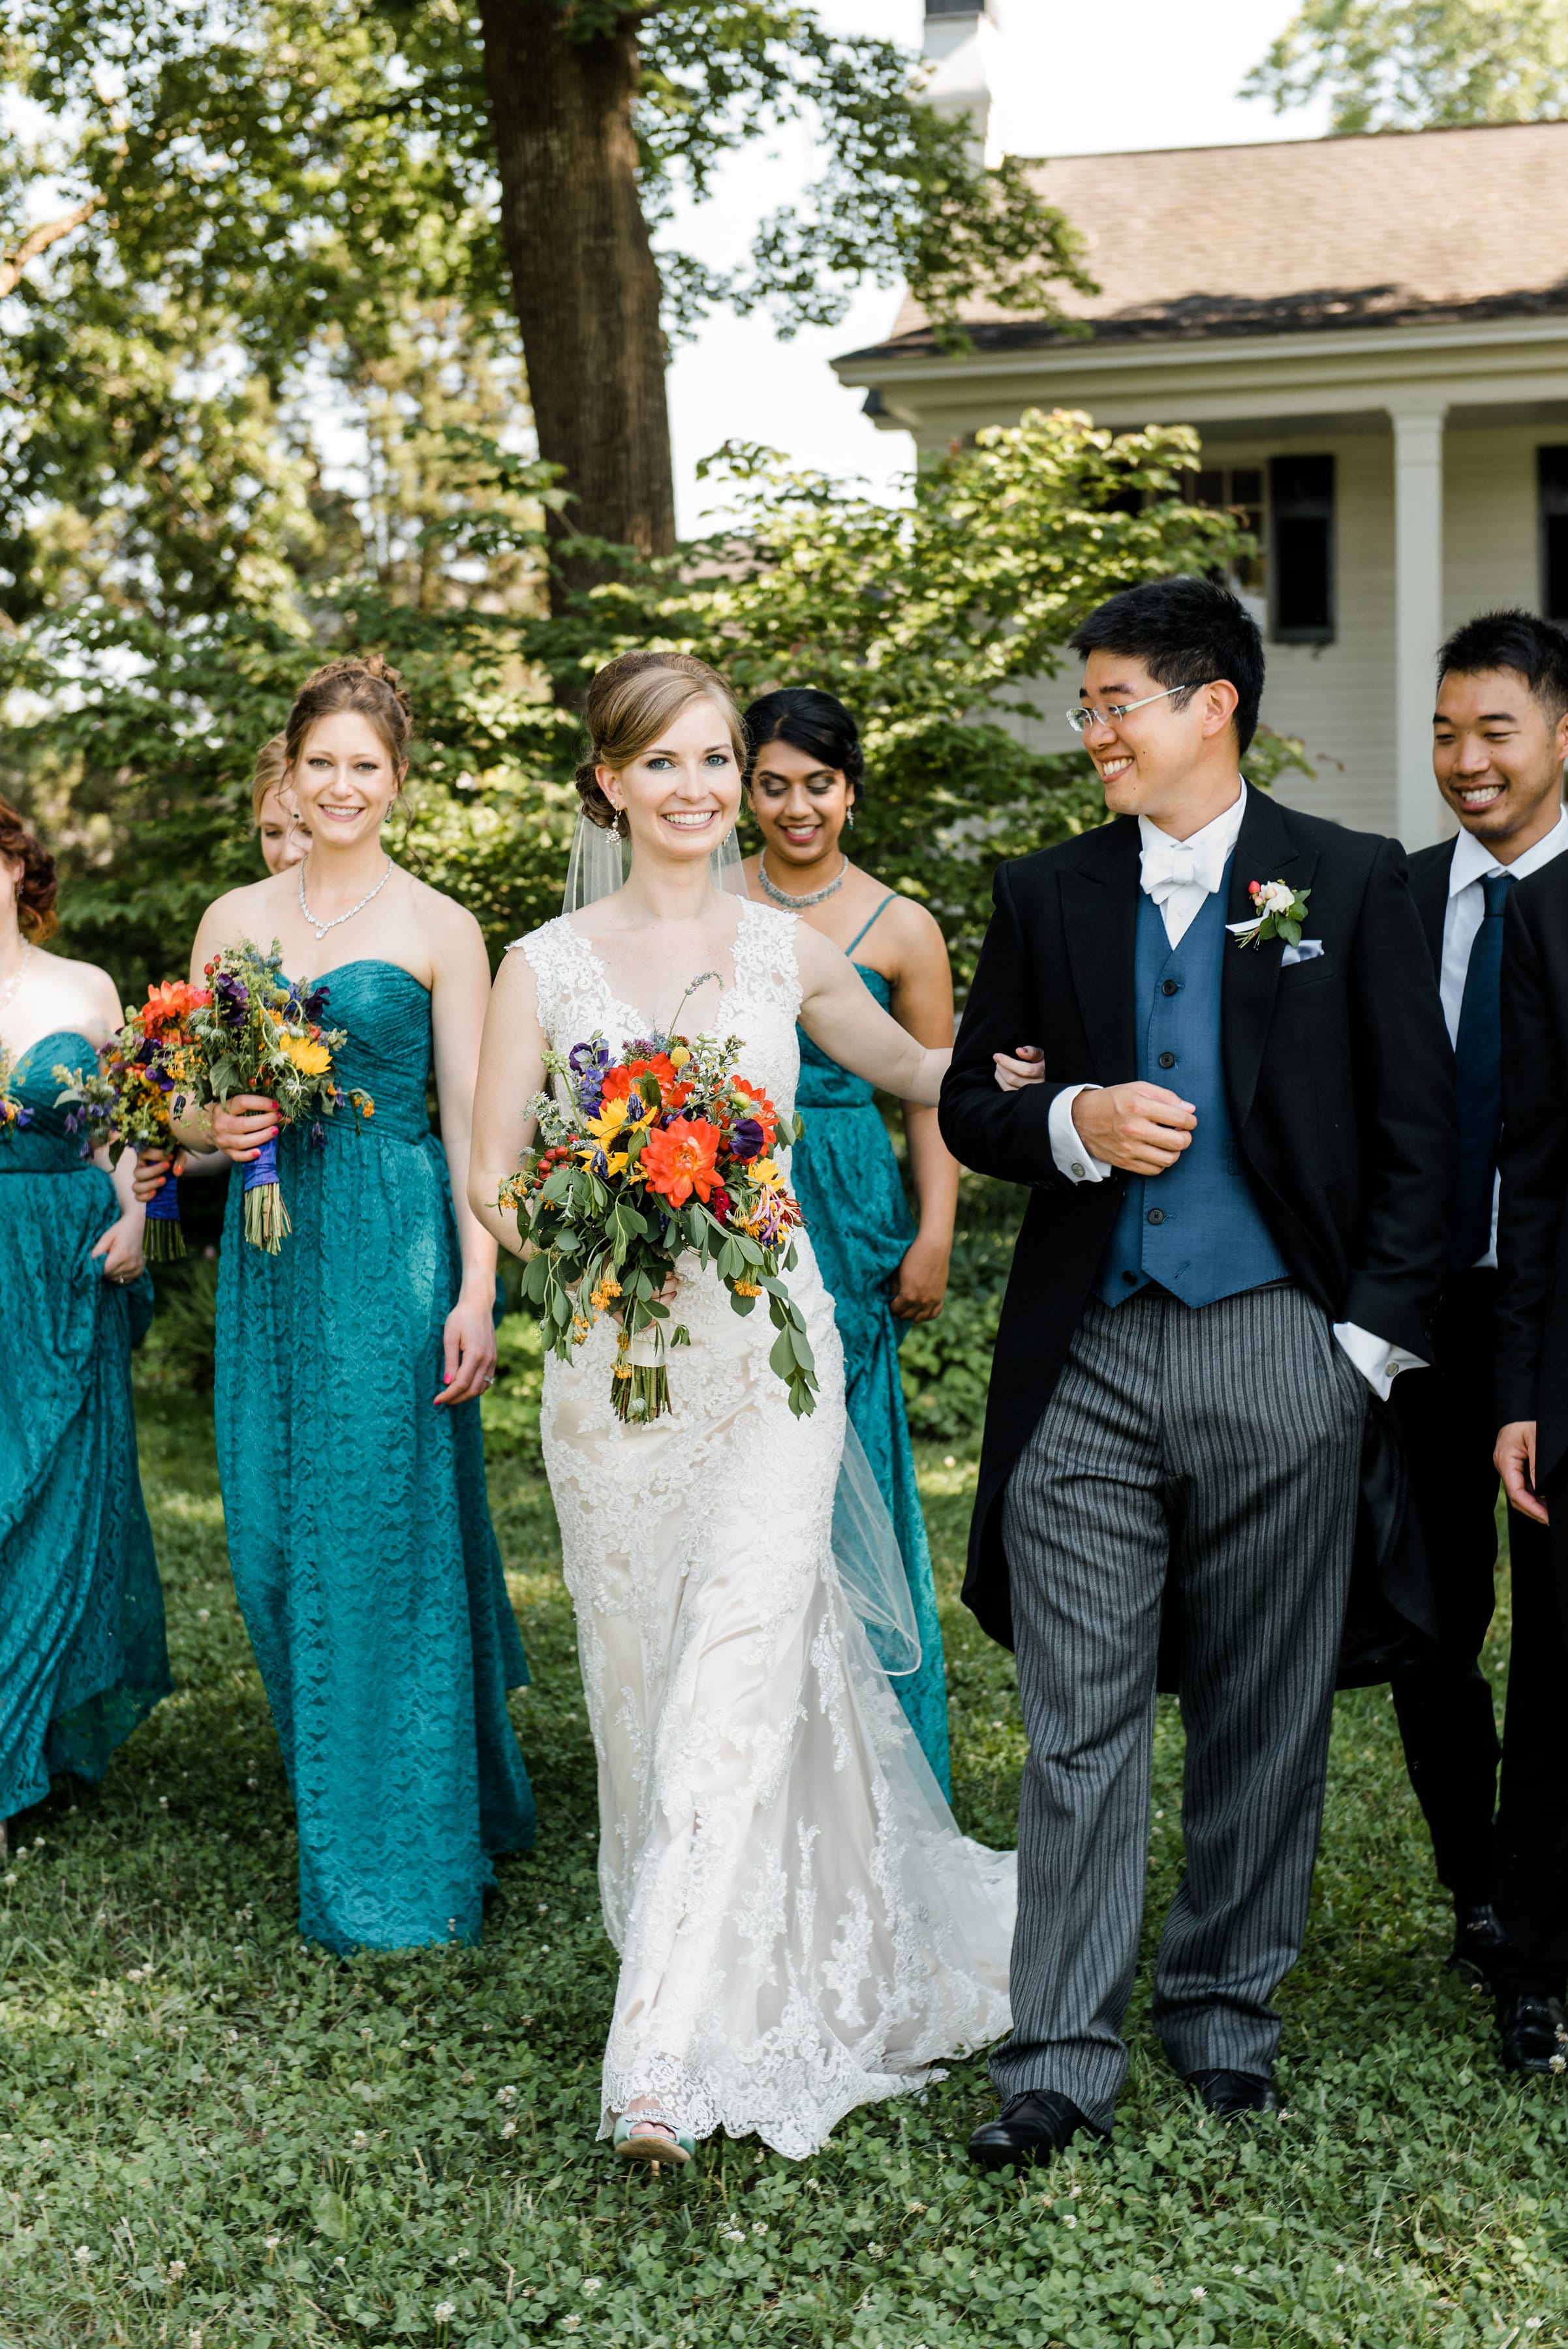 Lace Gown Melanie in Classic and Colorful Wedding - Maggie Bride wearing Melanie by Maggie Sottero